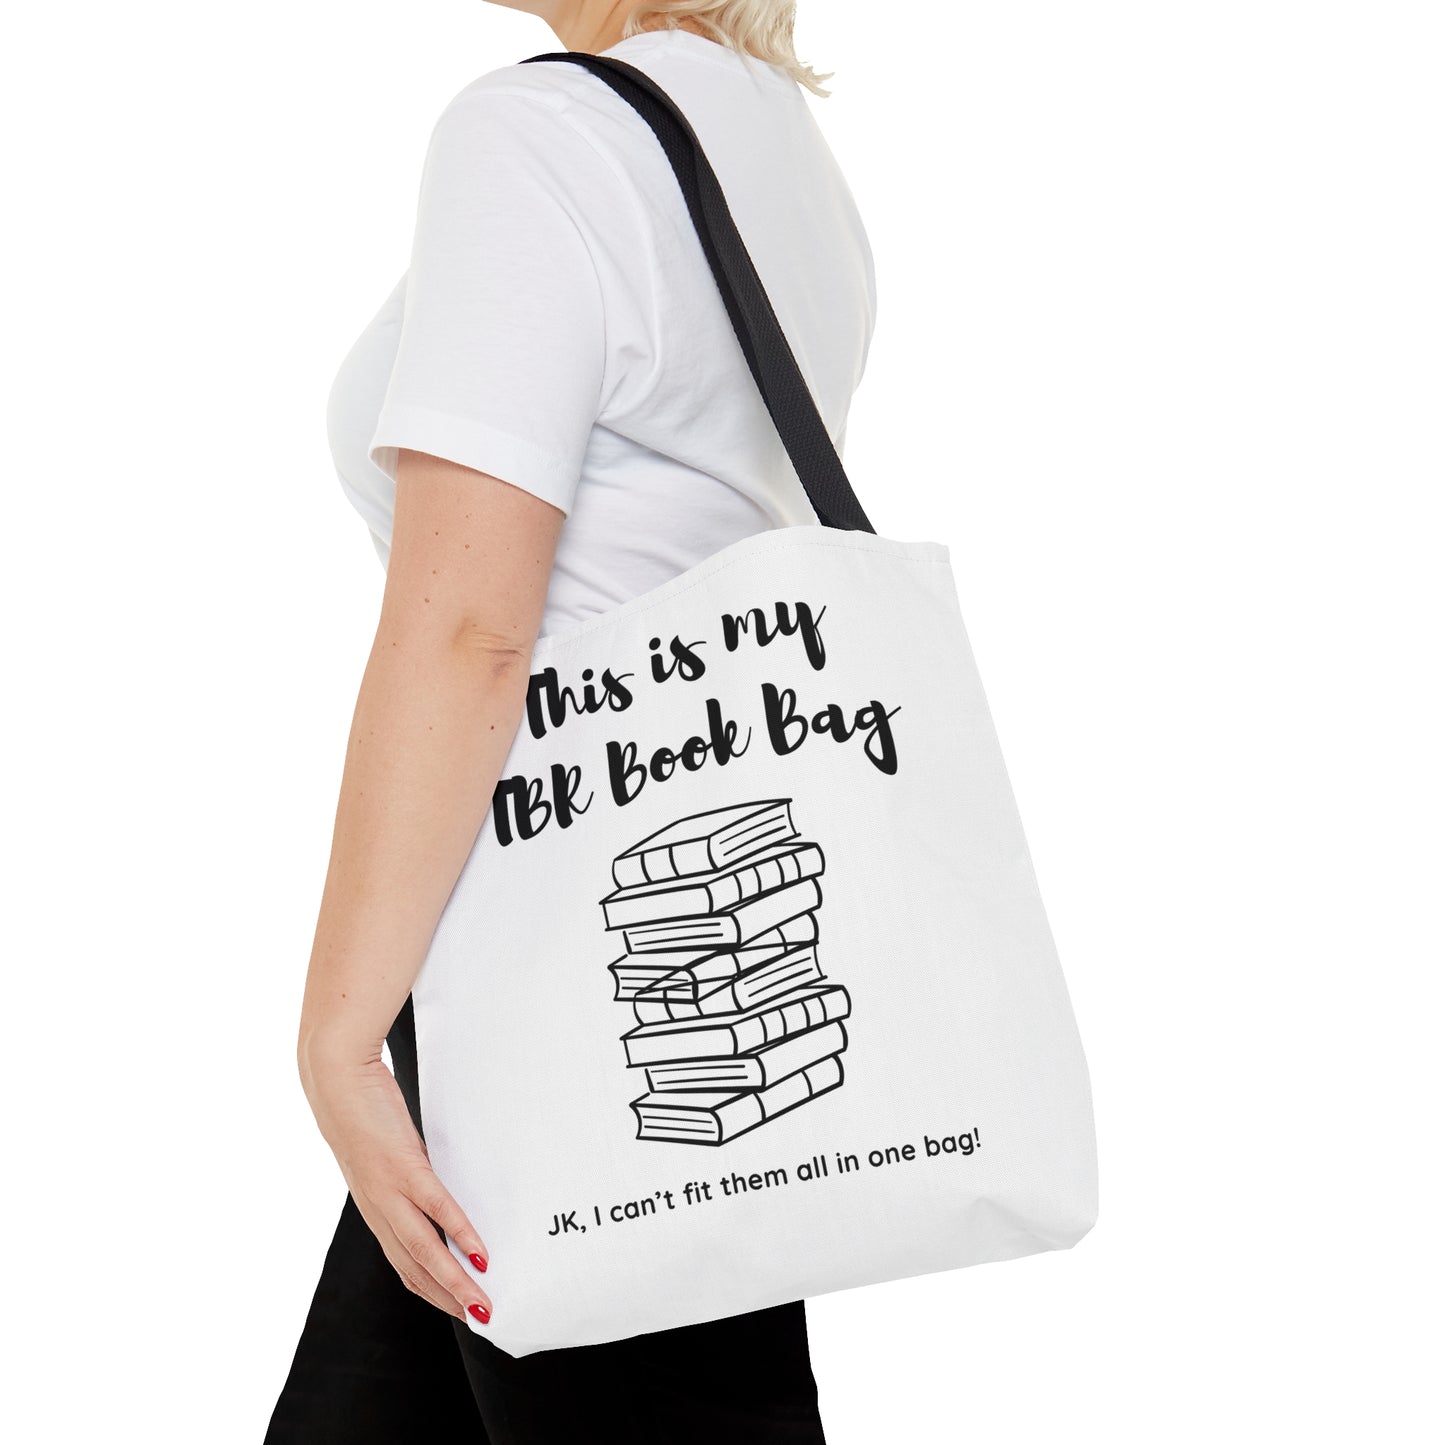 The TBR Tote Bag